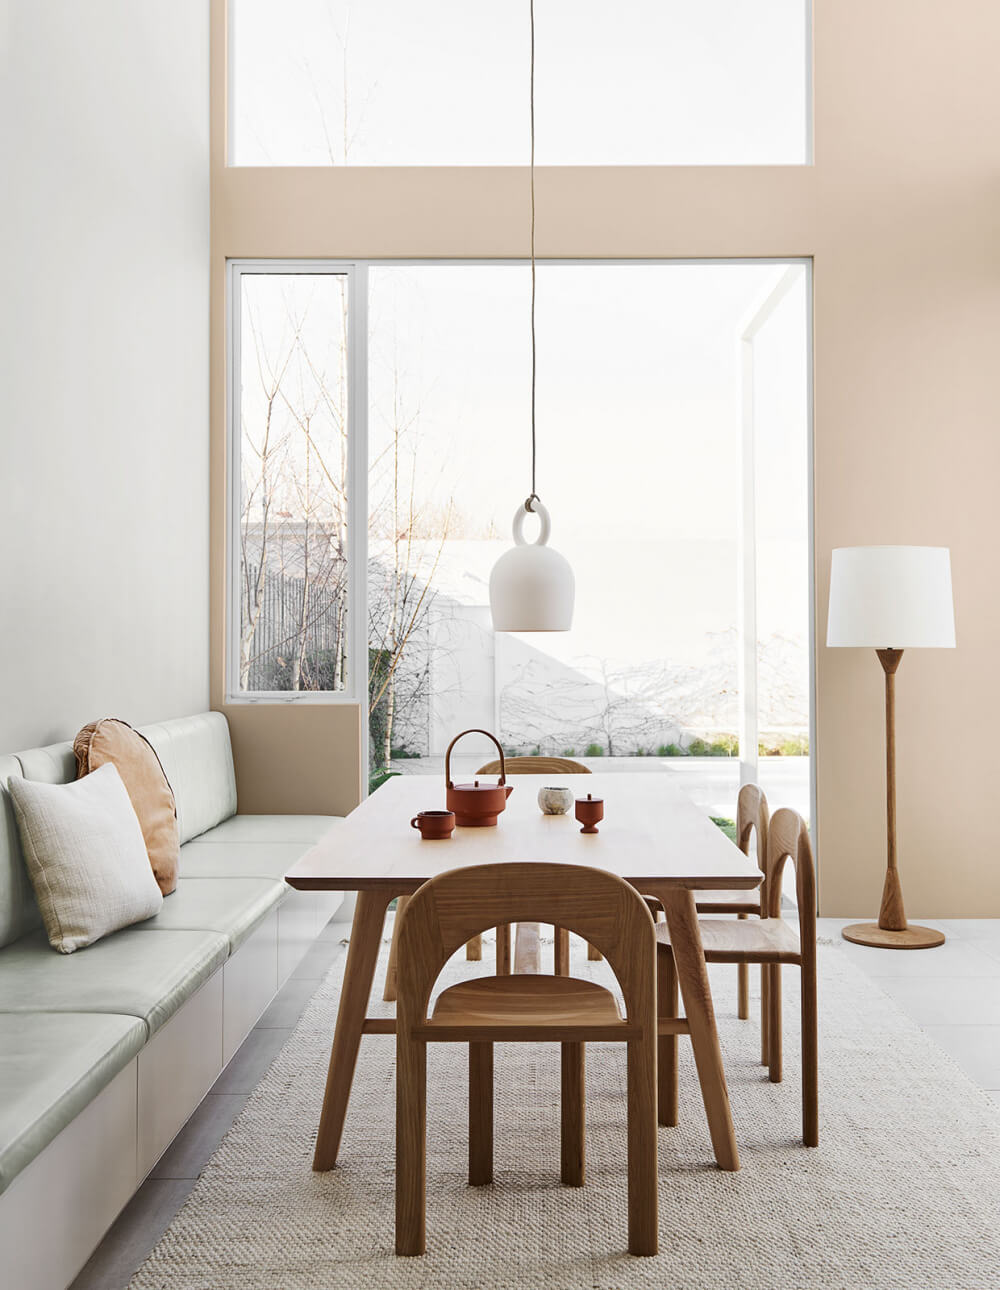 TheNordroom DuluxColorForecast2020 1 The Color Trends For 2020 Are Inspired by Nature